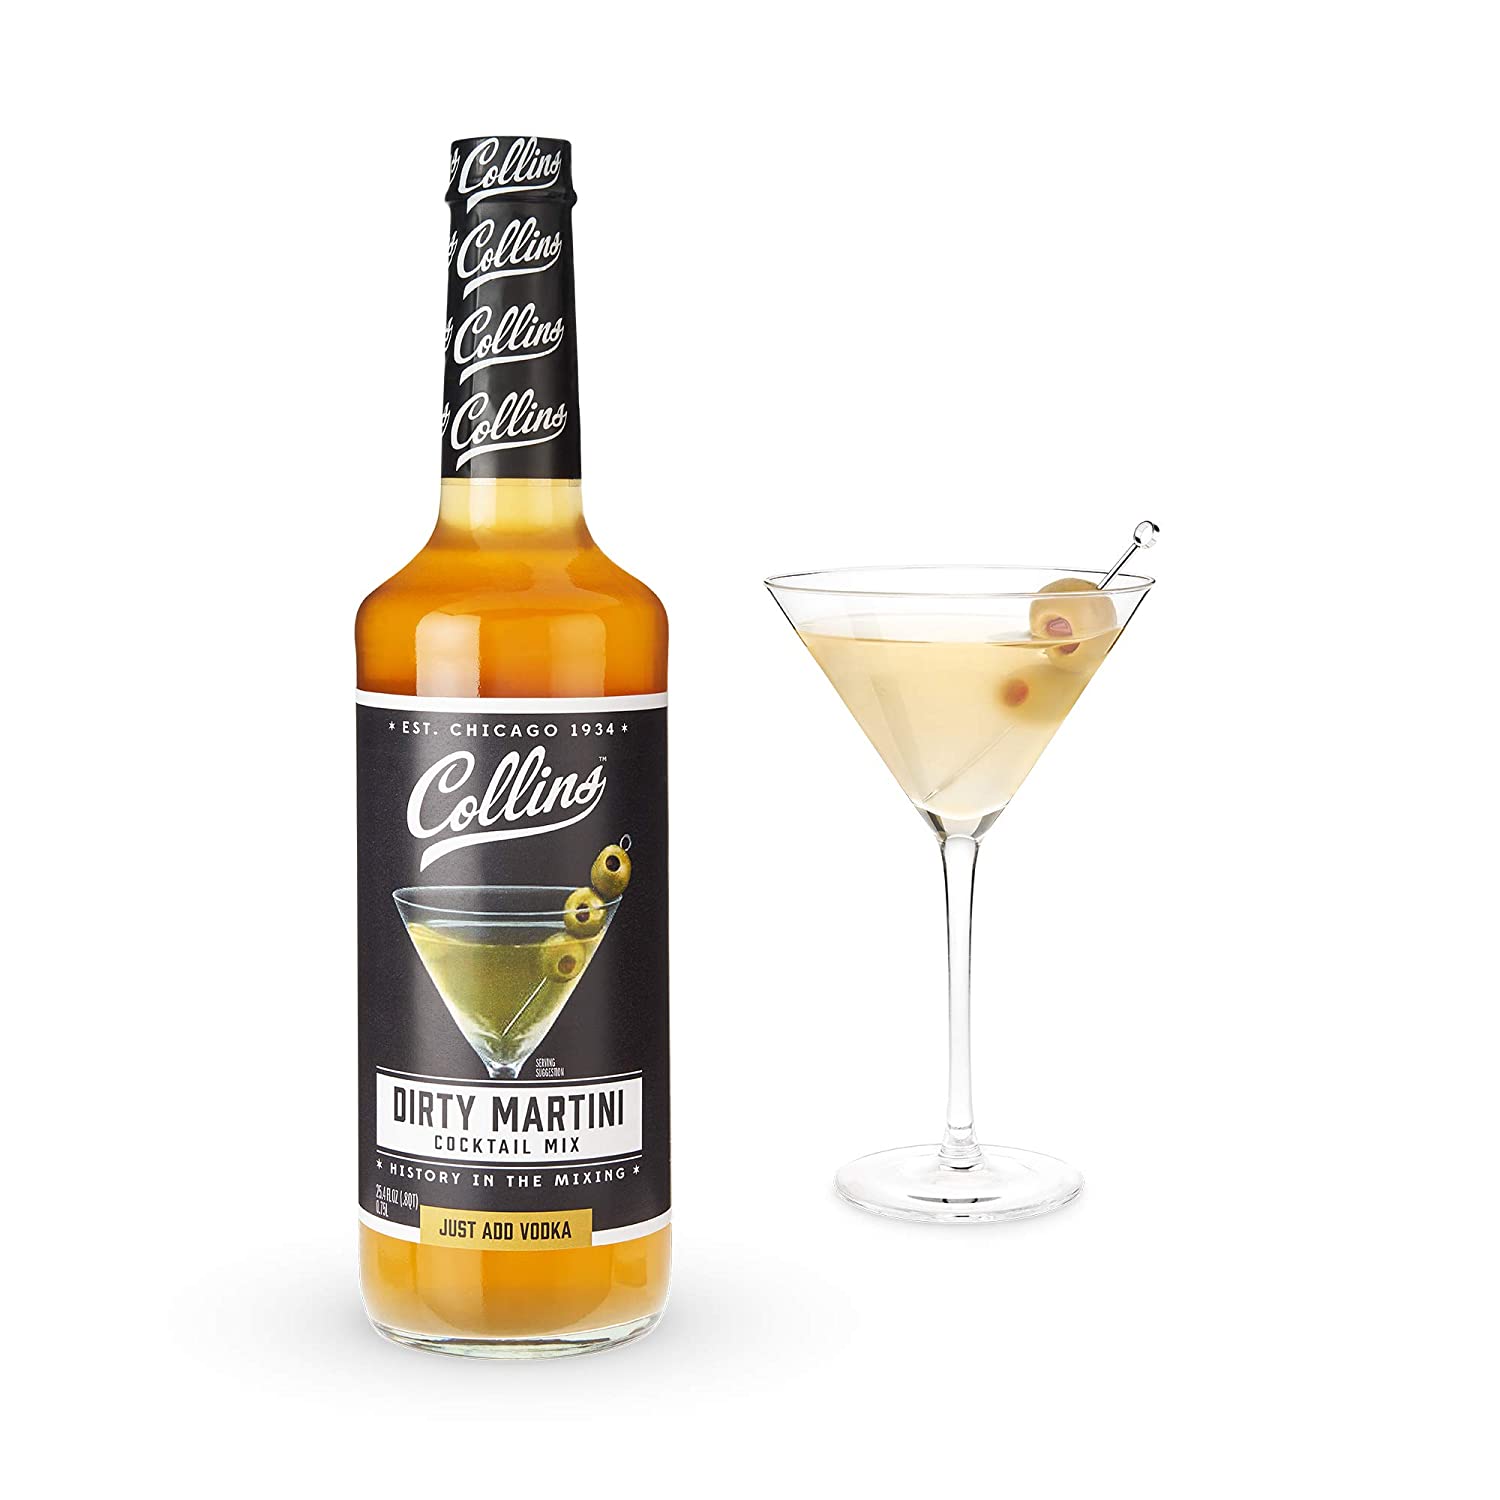 Dirty Martini Cocktail Mix by Collins - 25.4 fl oz